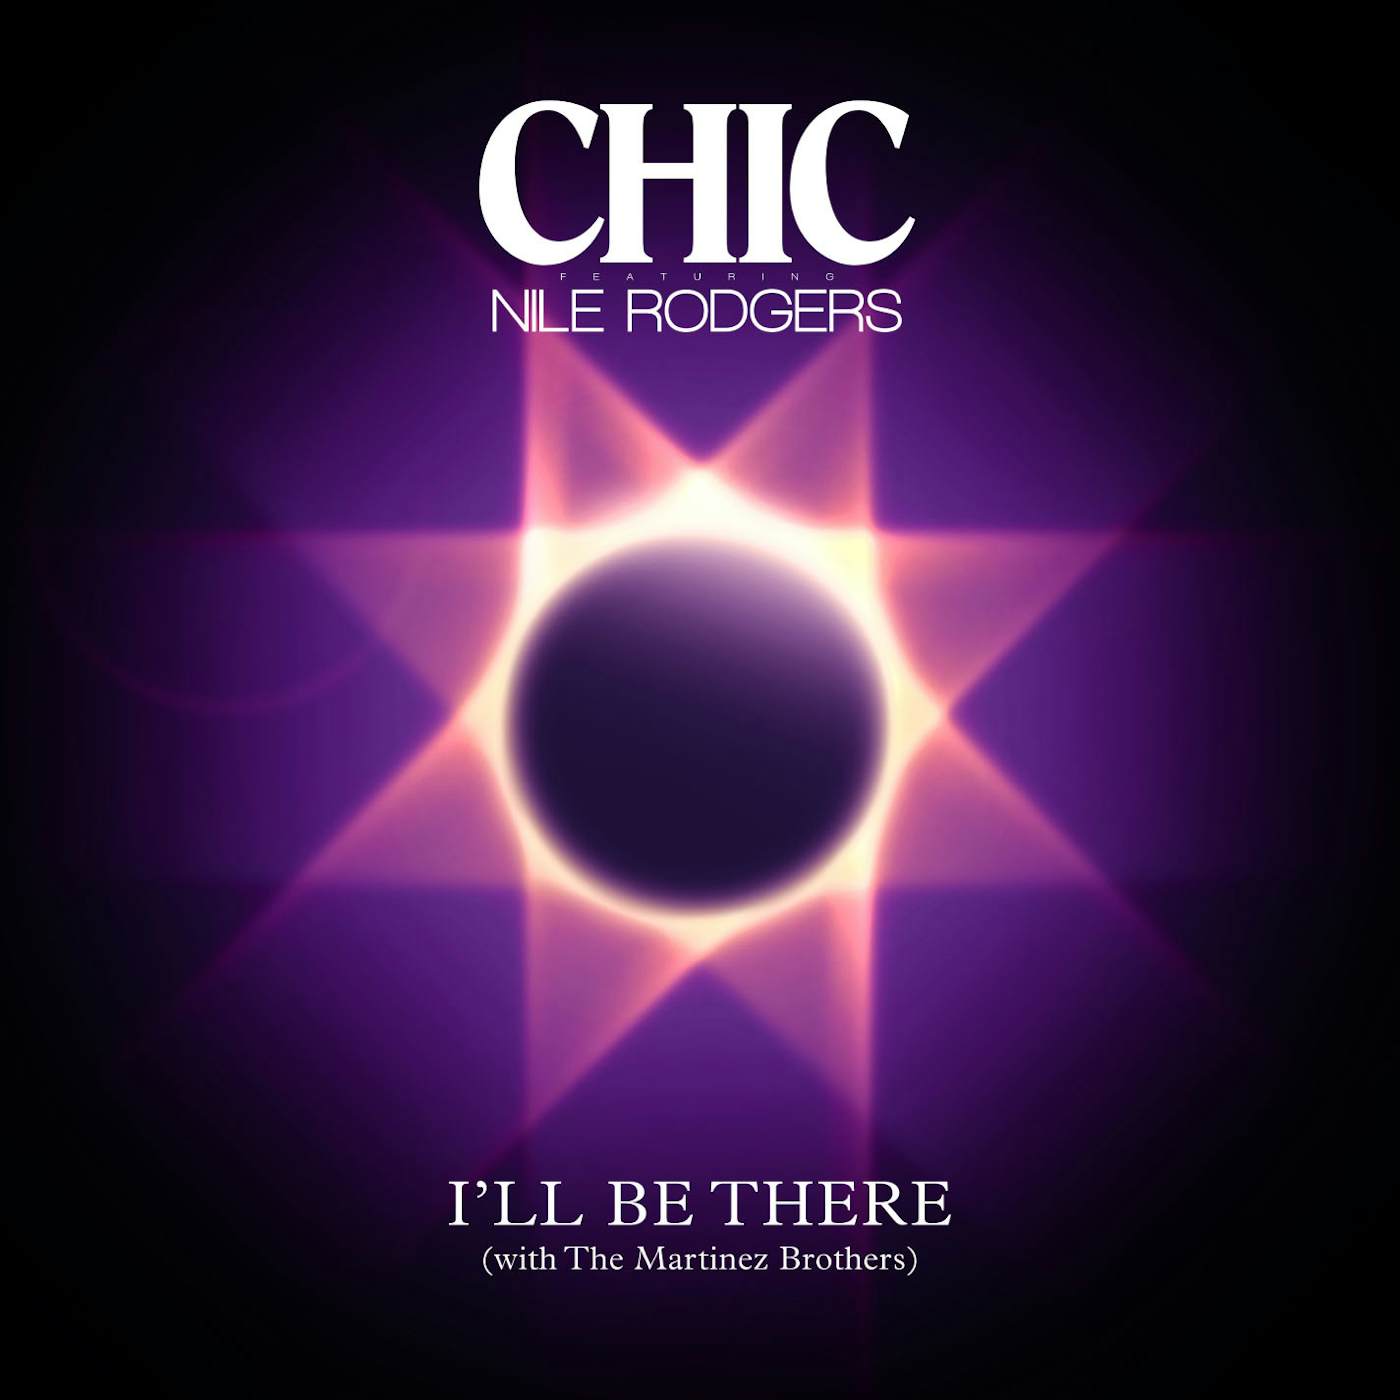 Nile Rodgers for The Chic Organisation I'LL BE THERE Vinyl Record